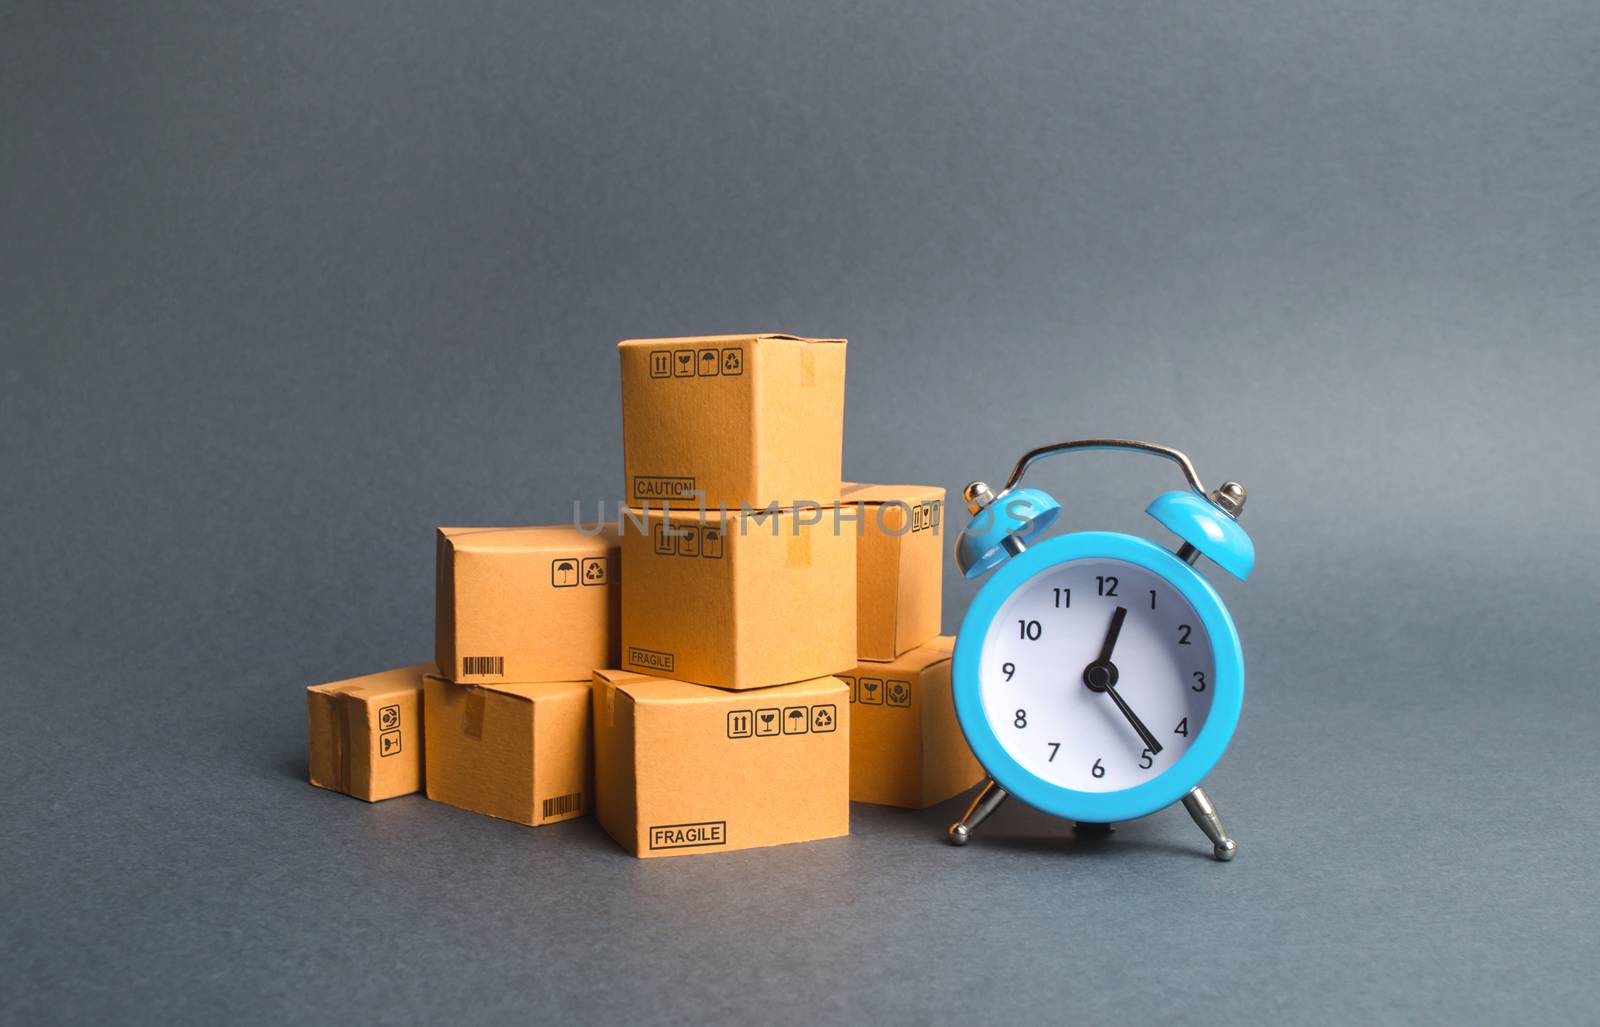 A stack of cardboard boxes and a blue alarm clock. Express delivery concept. Temporary storage, limited offer and discount. Optimization of logistics and delivery, improving efficiency, reducing costs